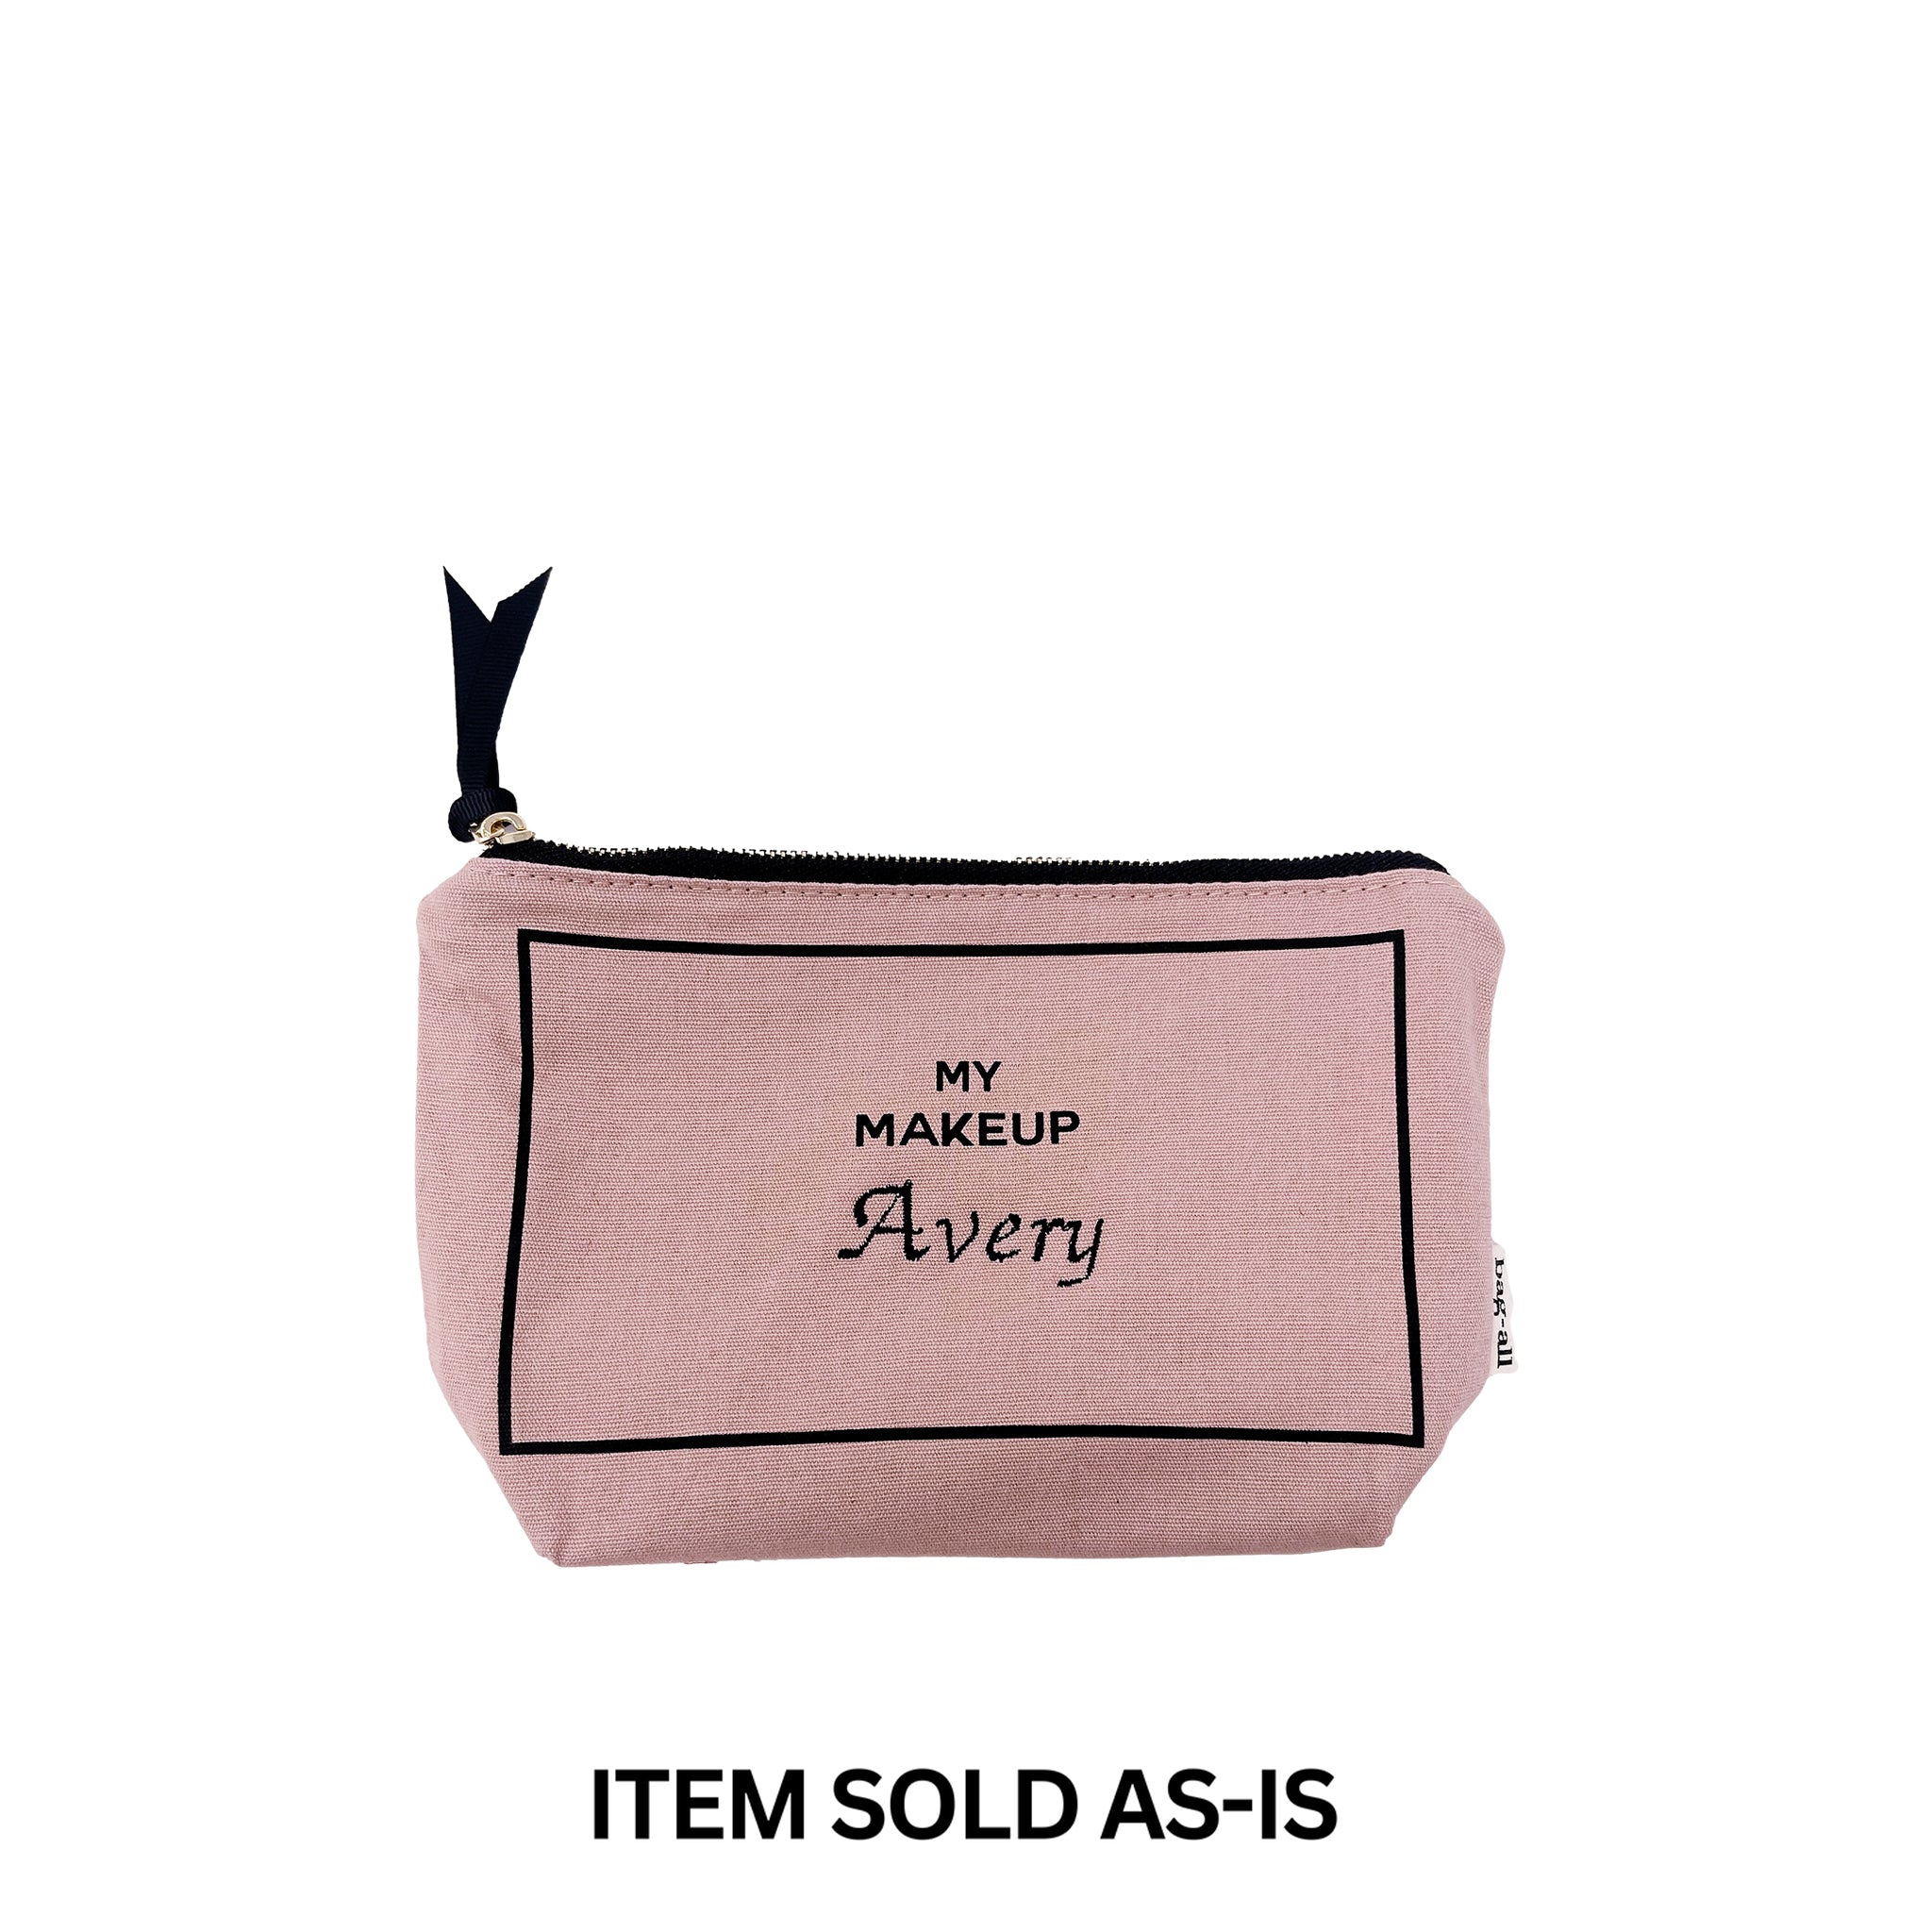 SALES BIN - My Makeup Pouch, Coated Lining Pink/Blush - Bag-all